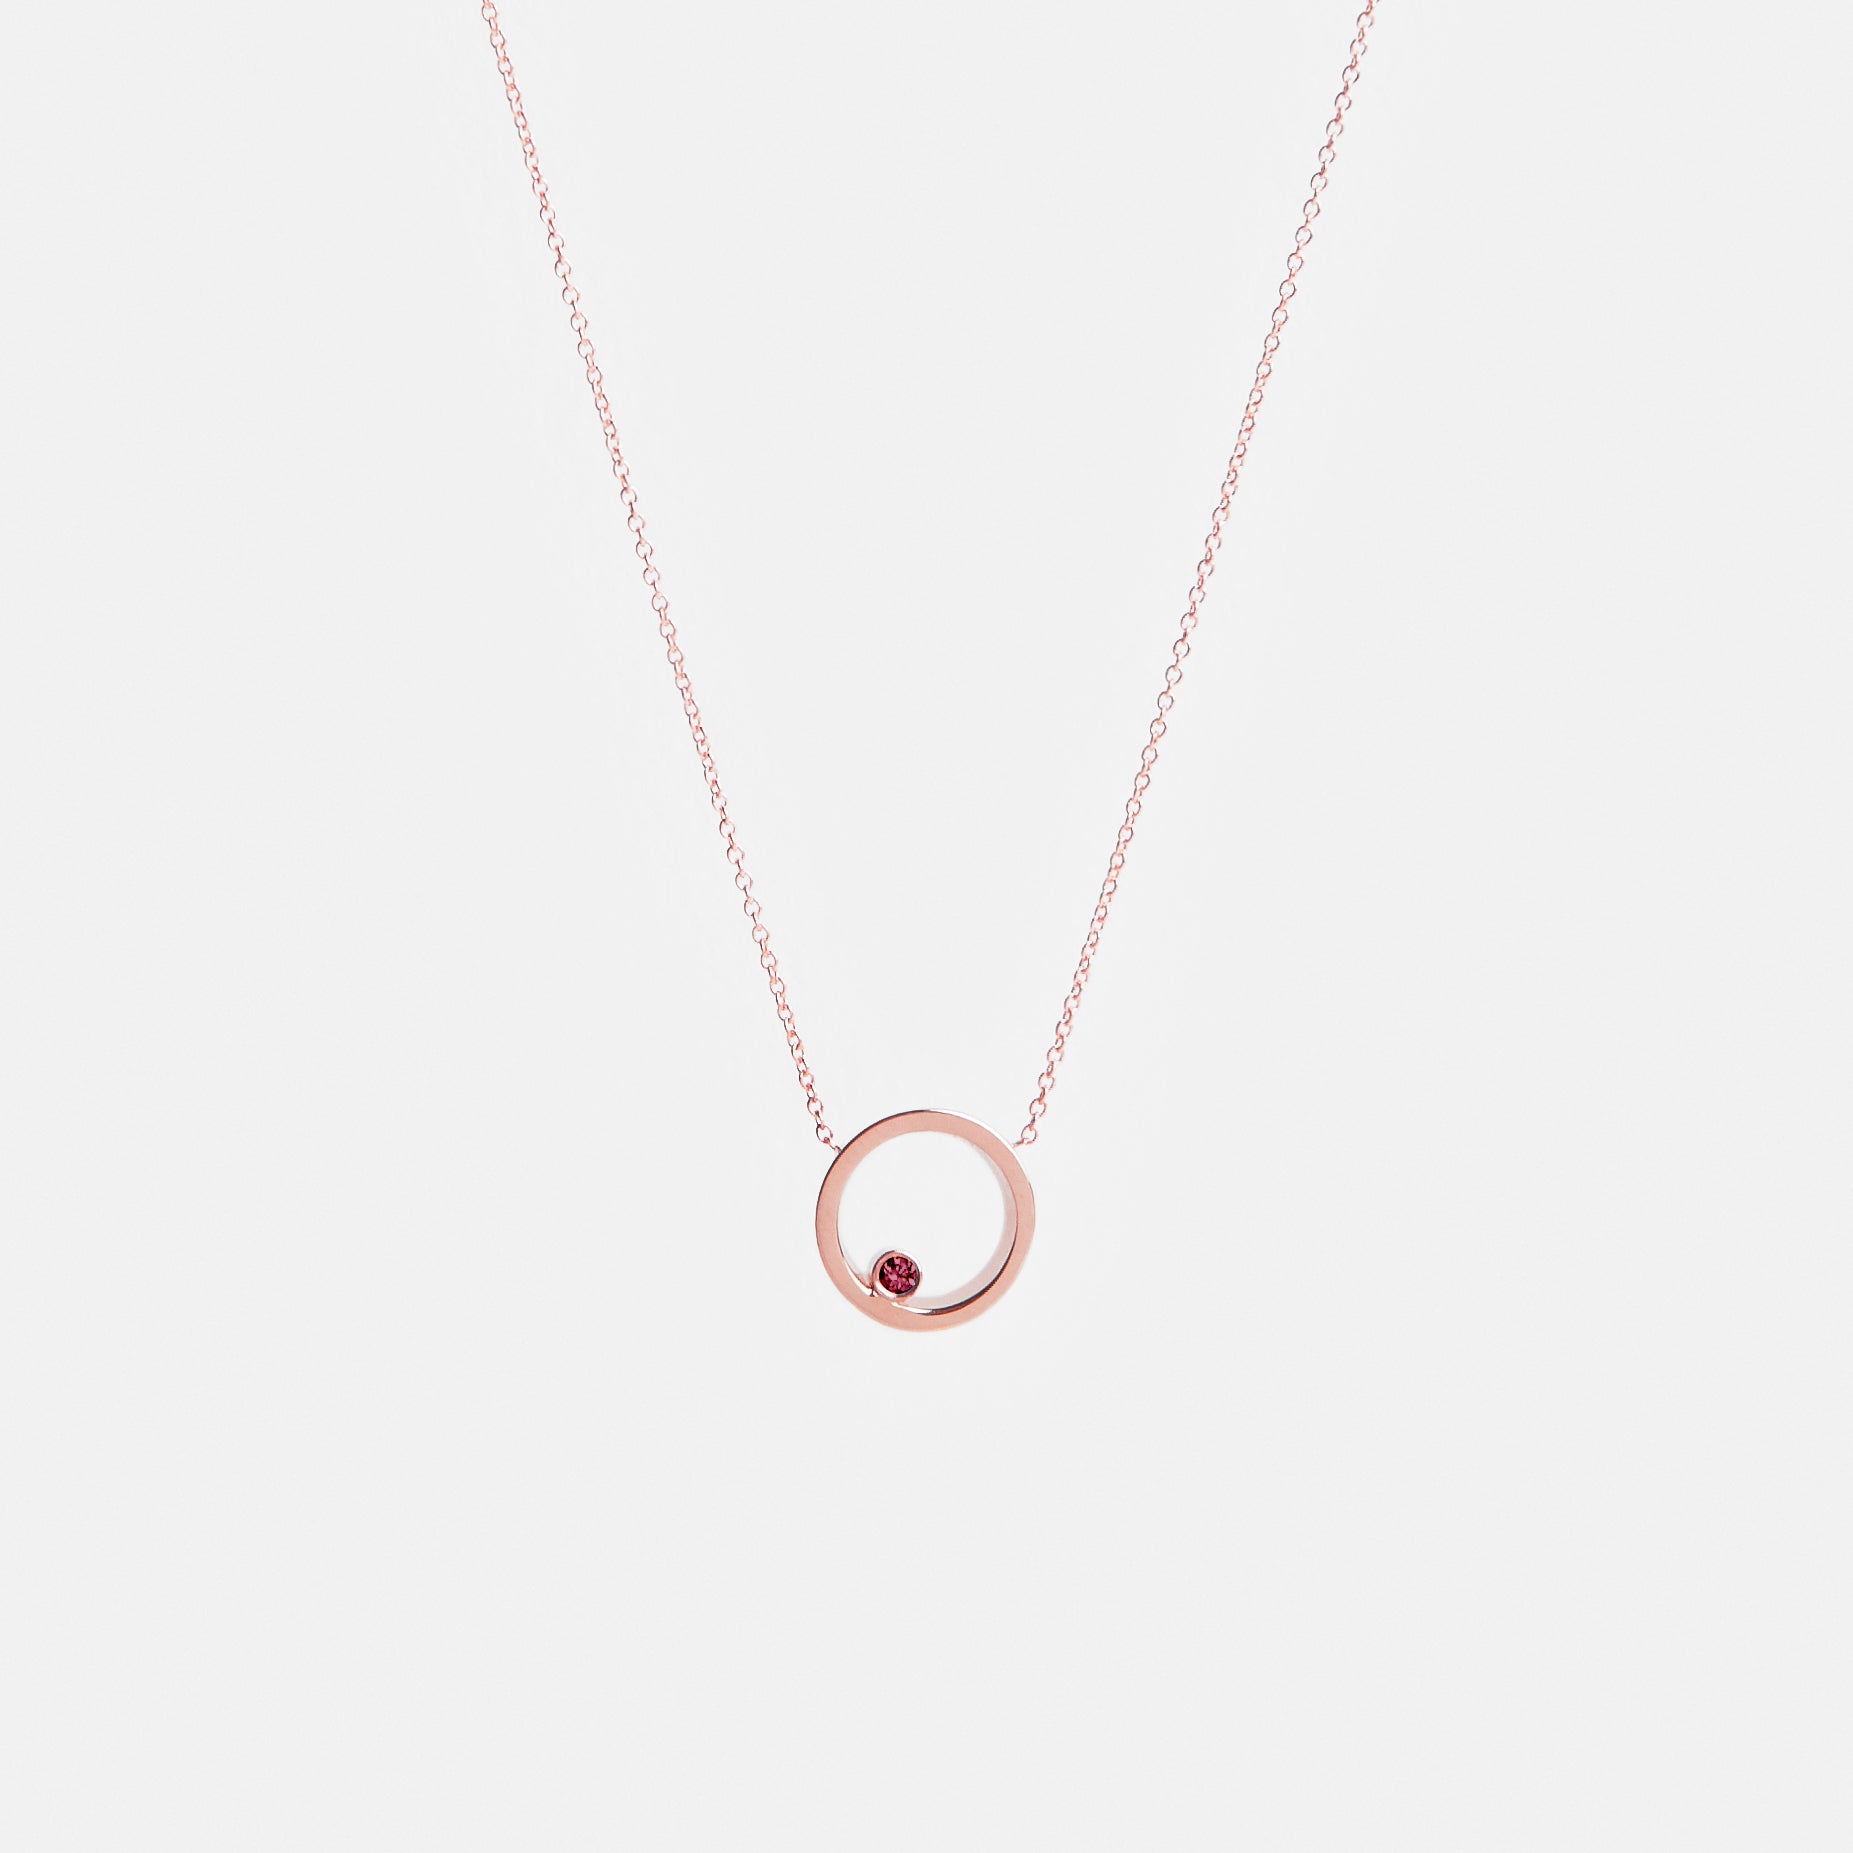 Ila Cool Necklace in 14k Rose Gold set with Ruby By SHW Fine Jewelry NYC